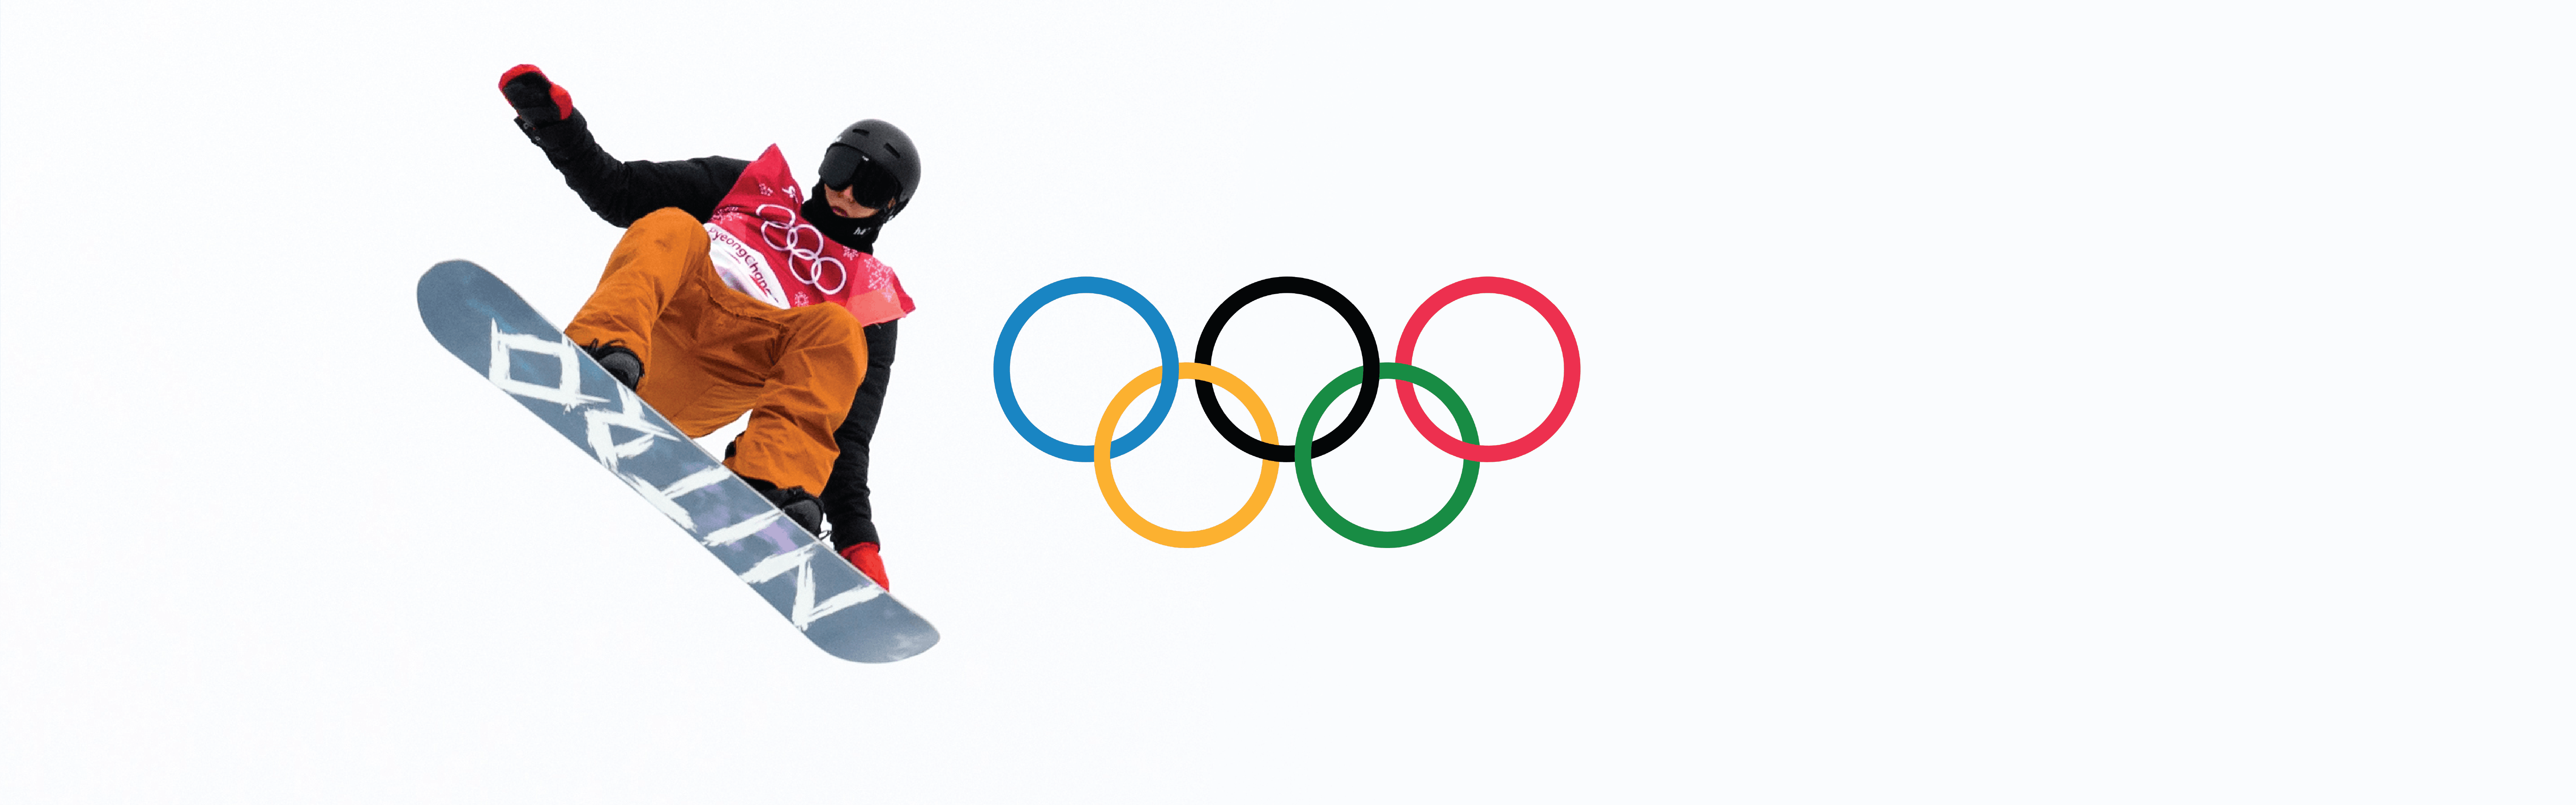 Winter Olympics 2022 - Highlights in Snowboarding | Curated.com